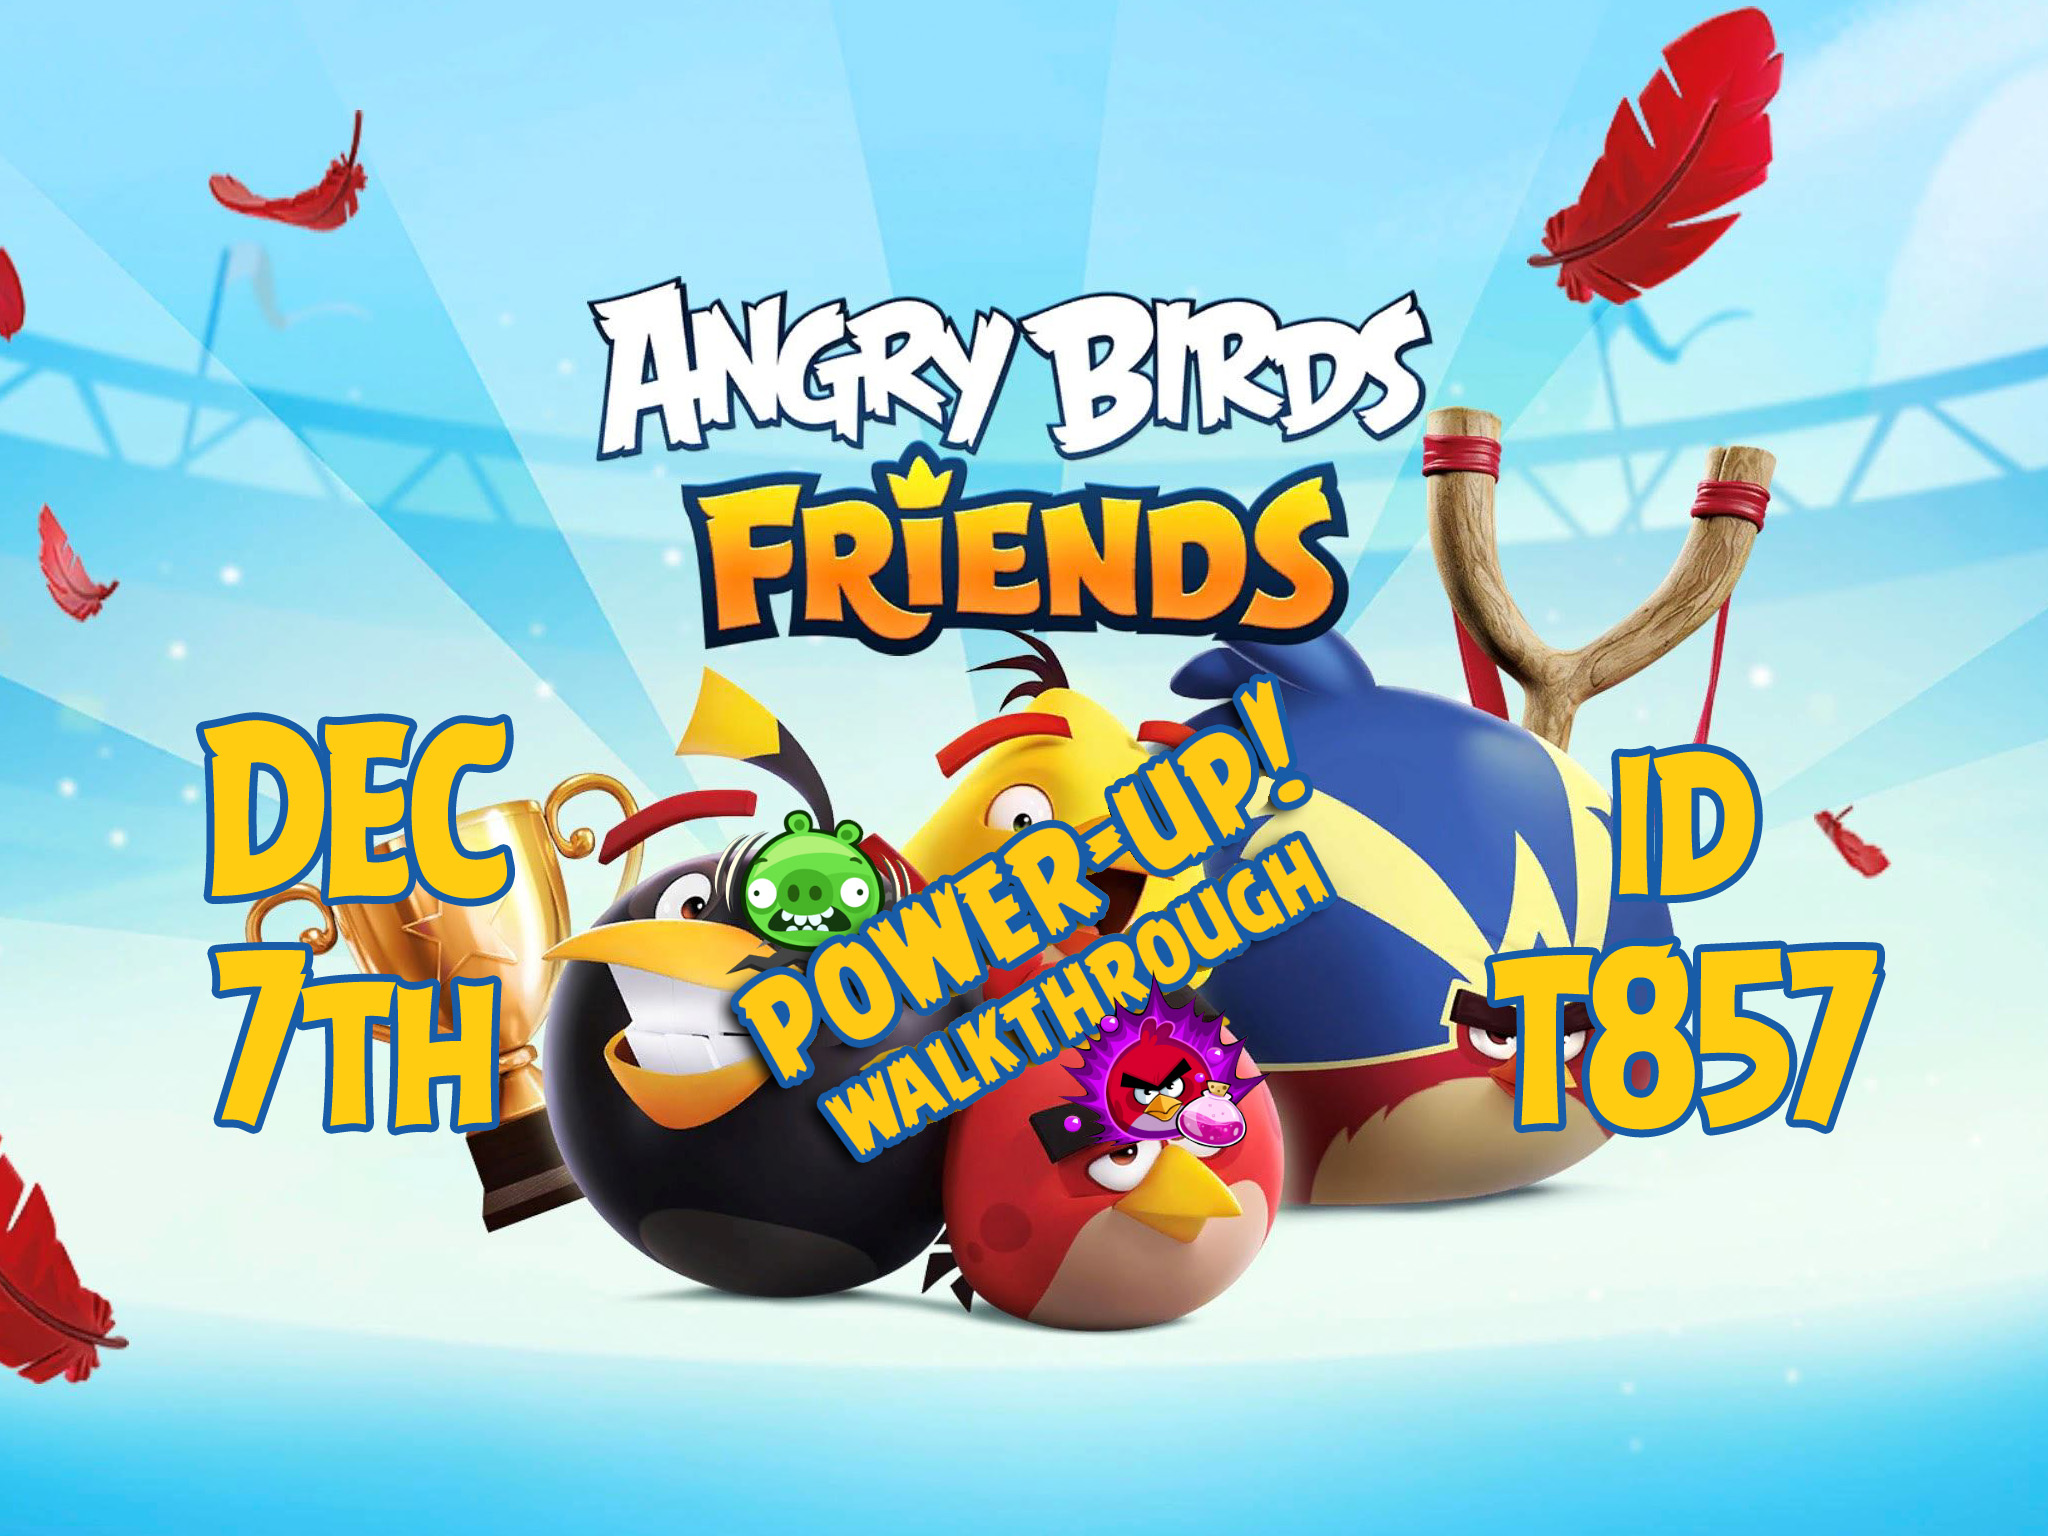 Angry-Birds-Friends-Tournament-T857-Feature-Image-PU